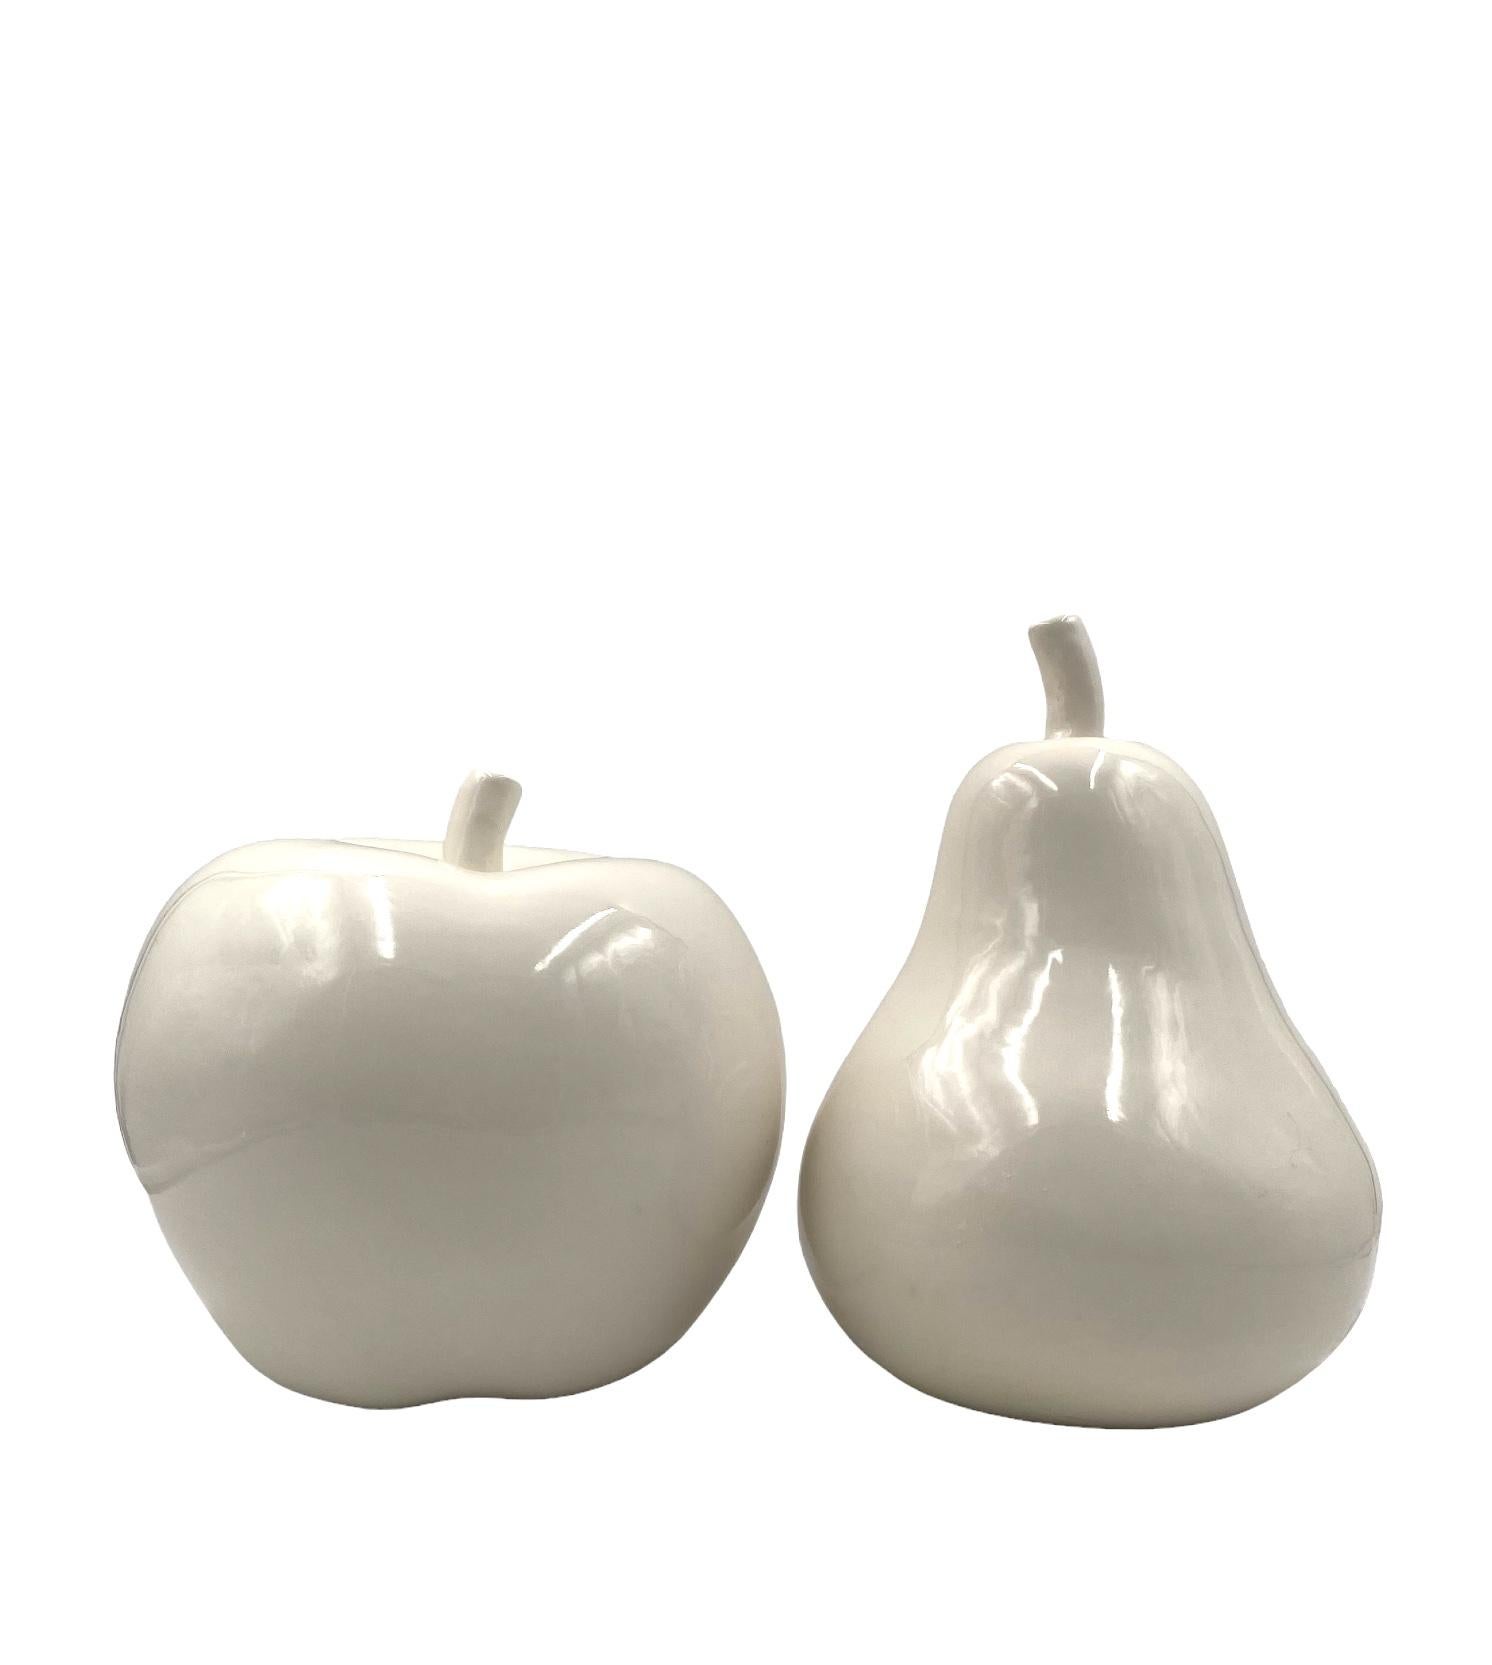 White ceramic Apple and Pear sculptures, Italy ca. 1980 For Sale 1